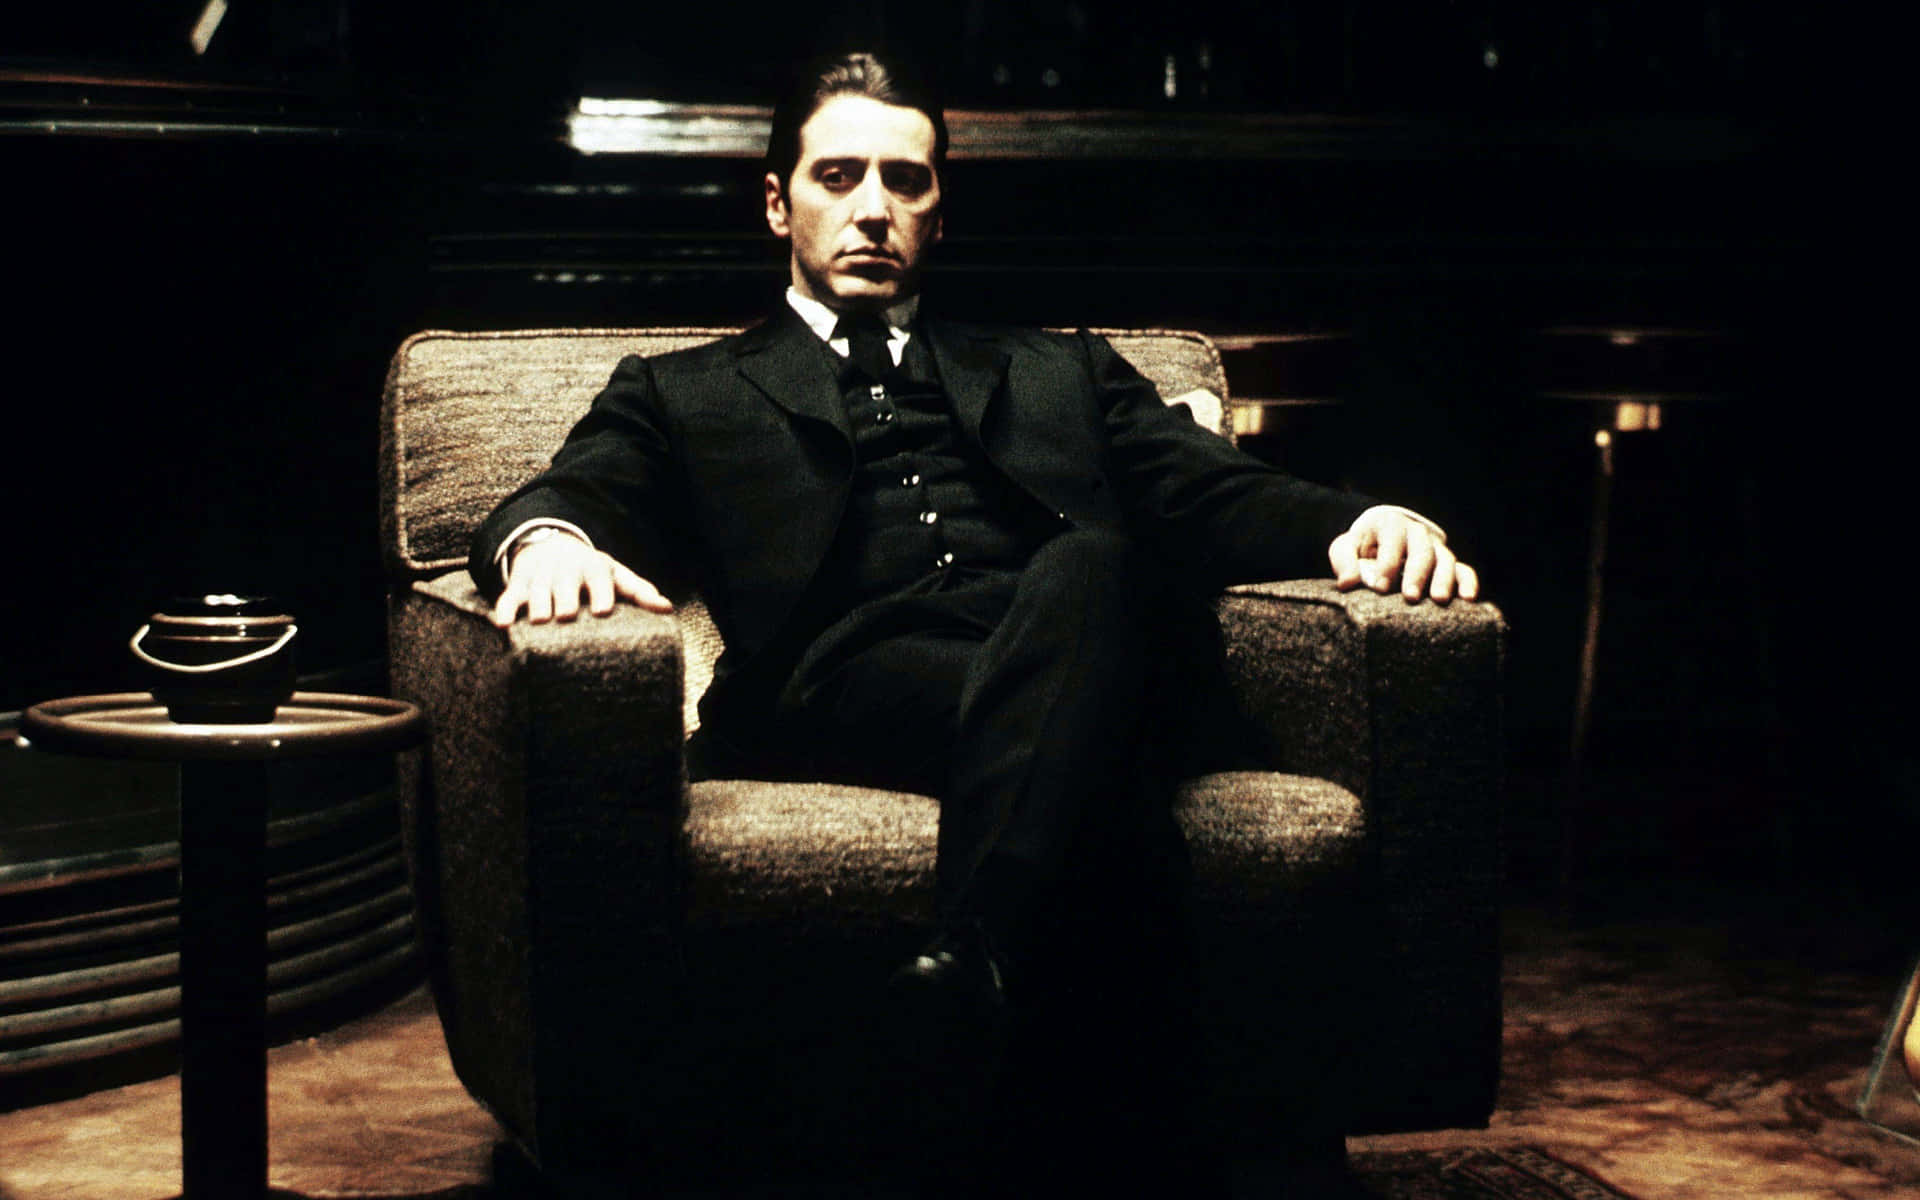 The iconic Michael Corleone from the Godfather movie series. Wallpaper